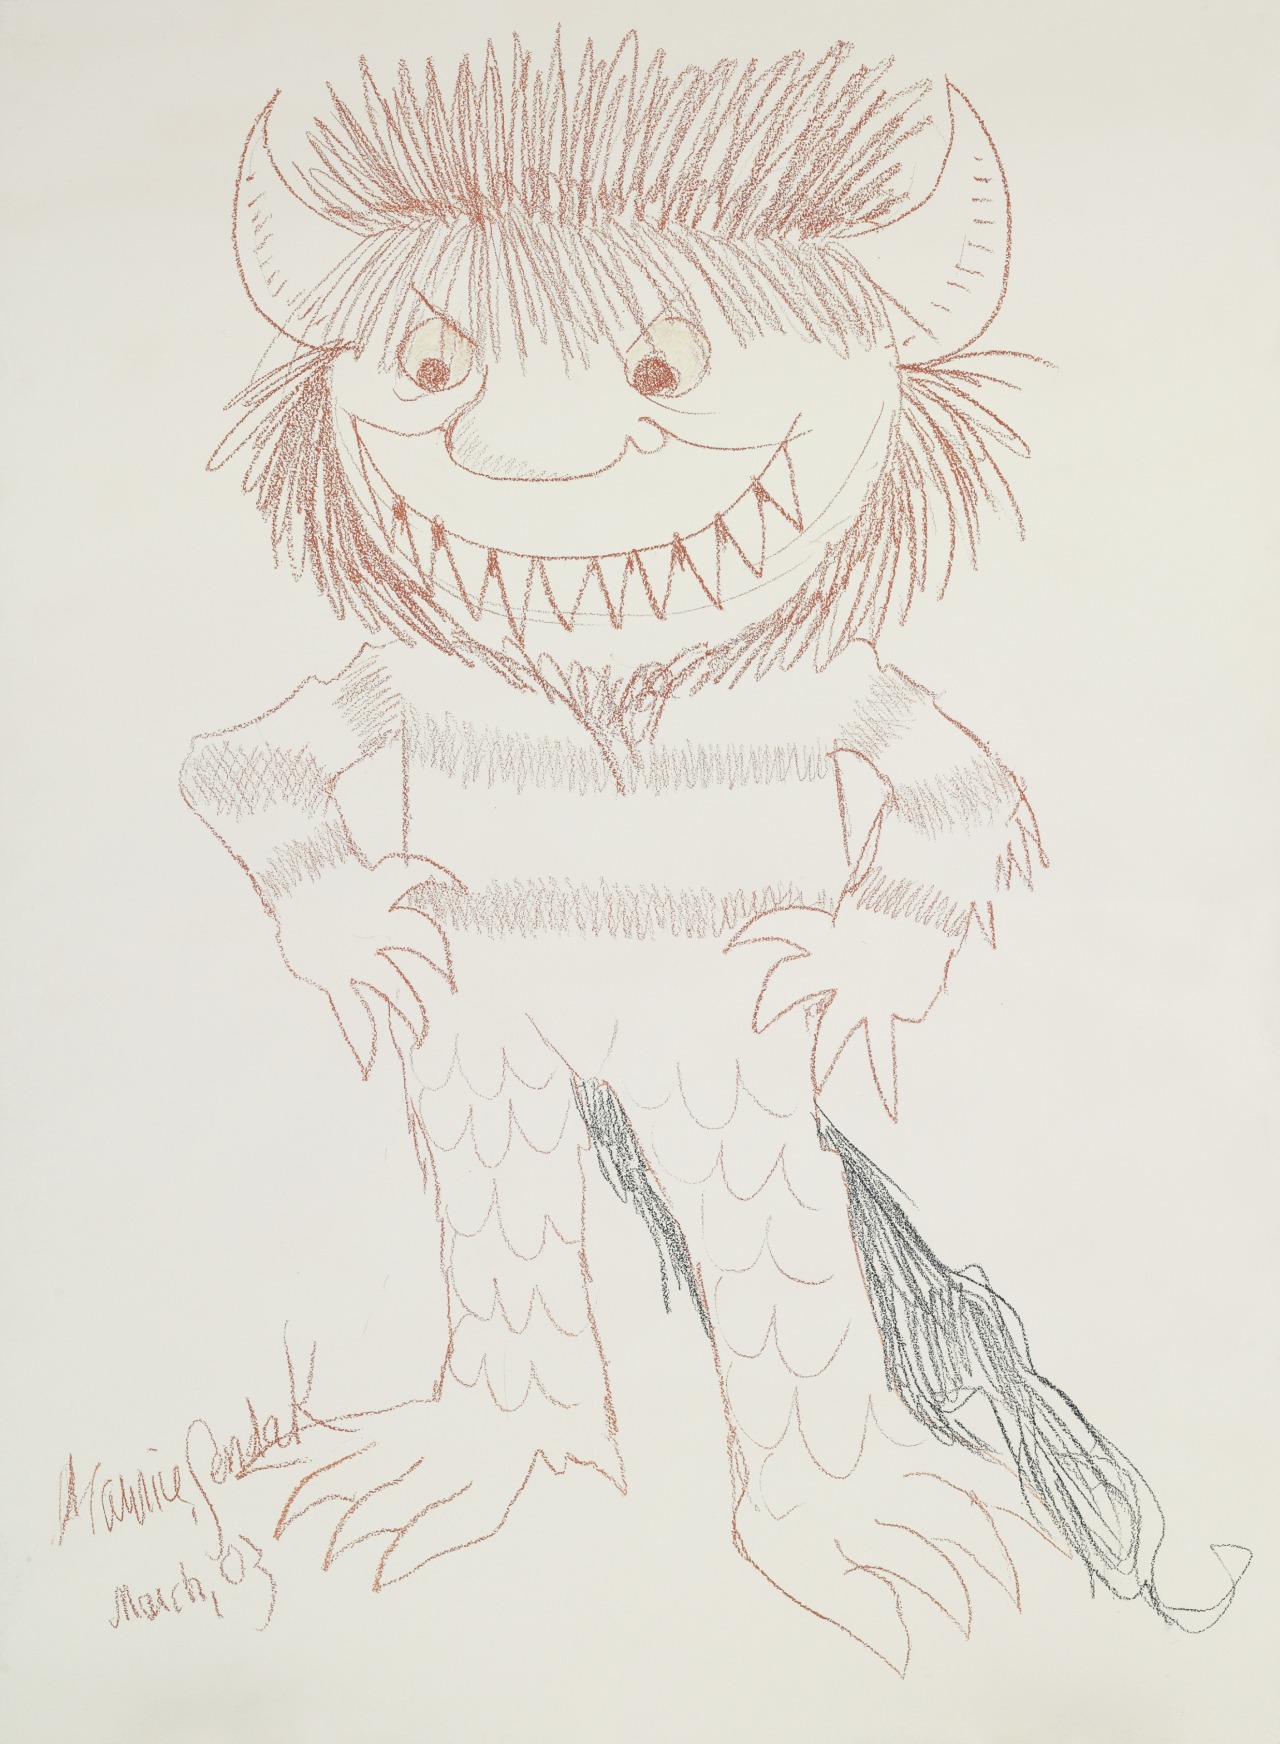 SENDAK, Maurice (1928-2012). "Moishe" from Where The Wild Things Are, 2003.<br />Fine Printed Books and Manuscripts Including Americana